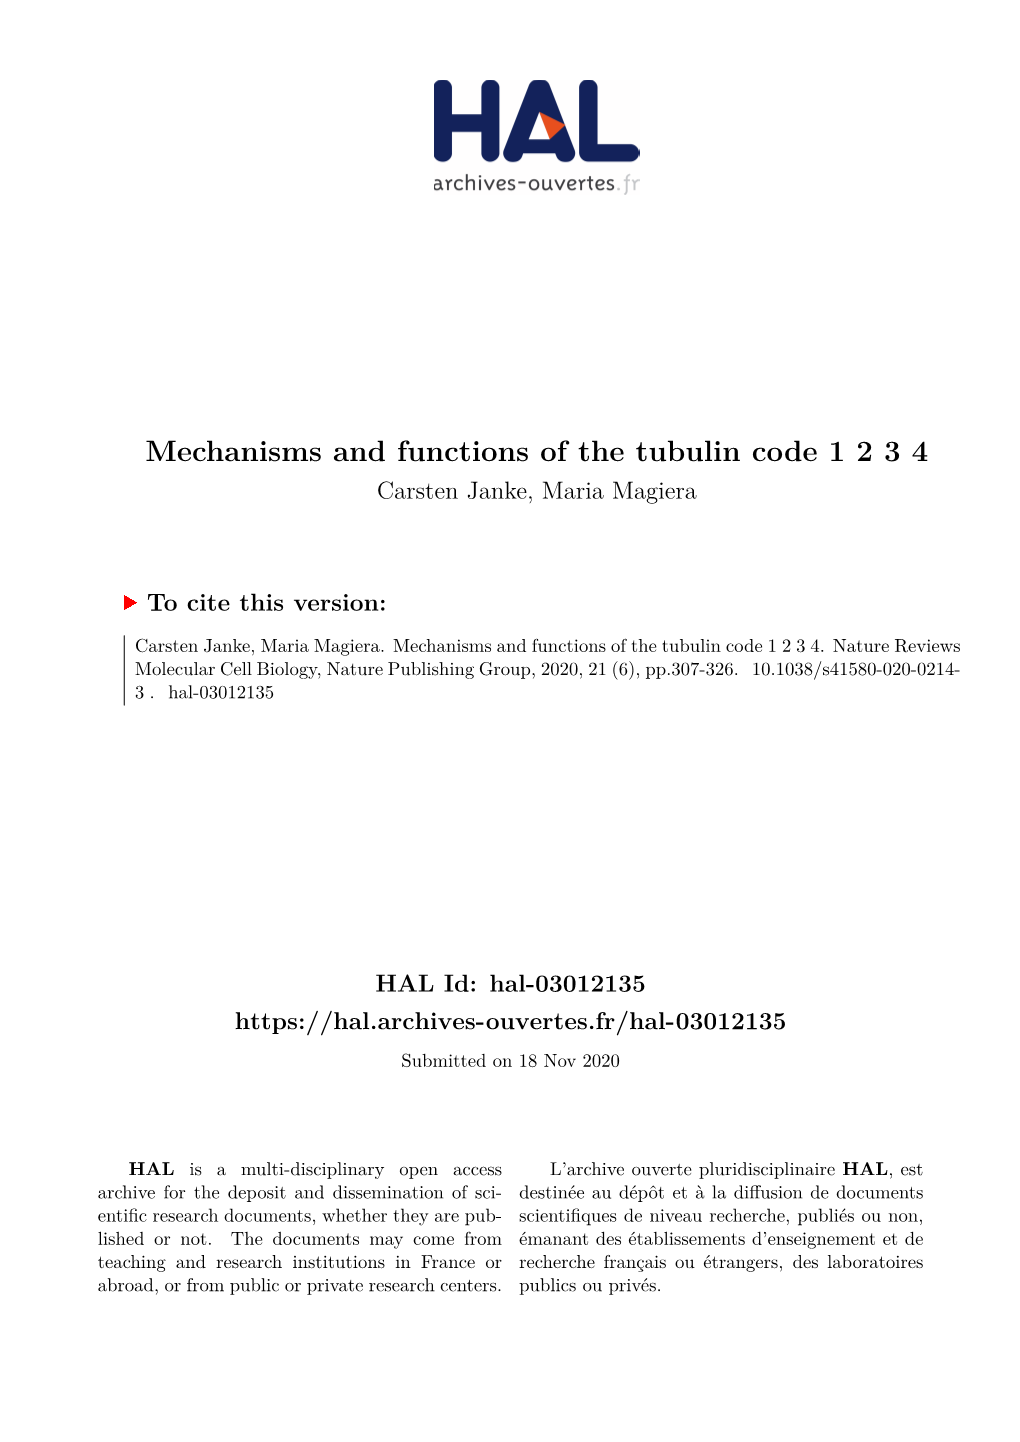 Mechanisms and Functions of the Tubulin Code 1 2 3 4 Carsten Janke, Maria Magiera